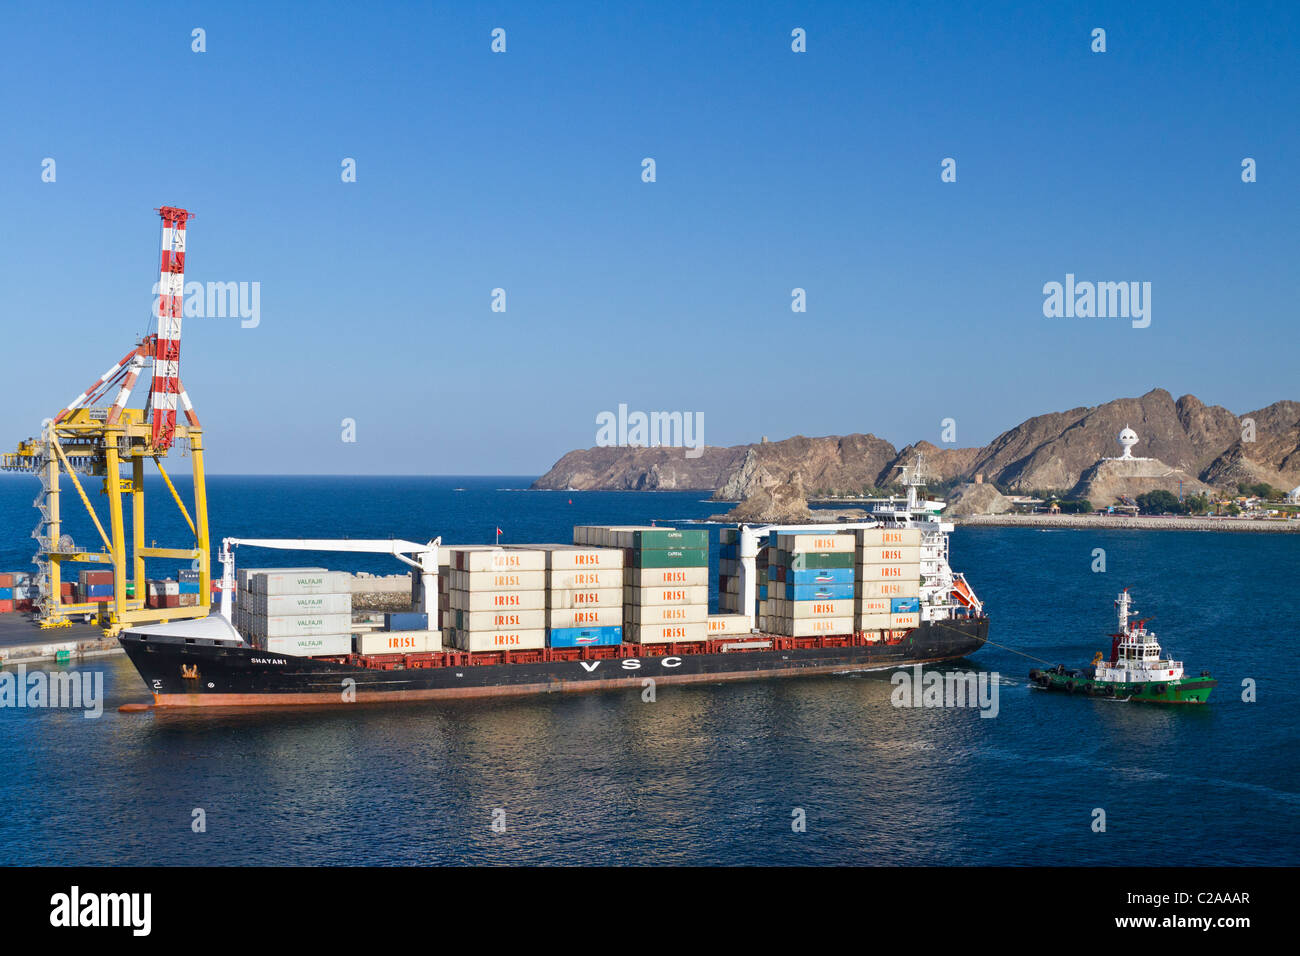 A loaded container ship entering Port Sultan Qaboos in Muscat Oman. Stock Photo